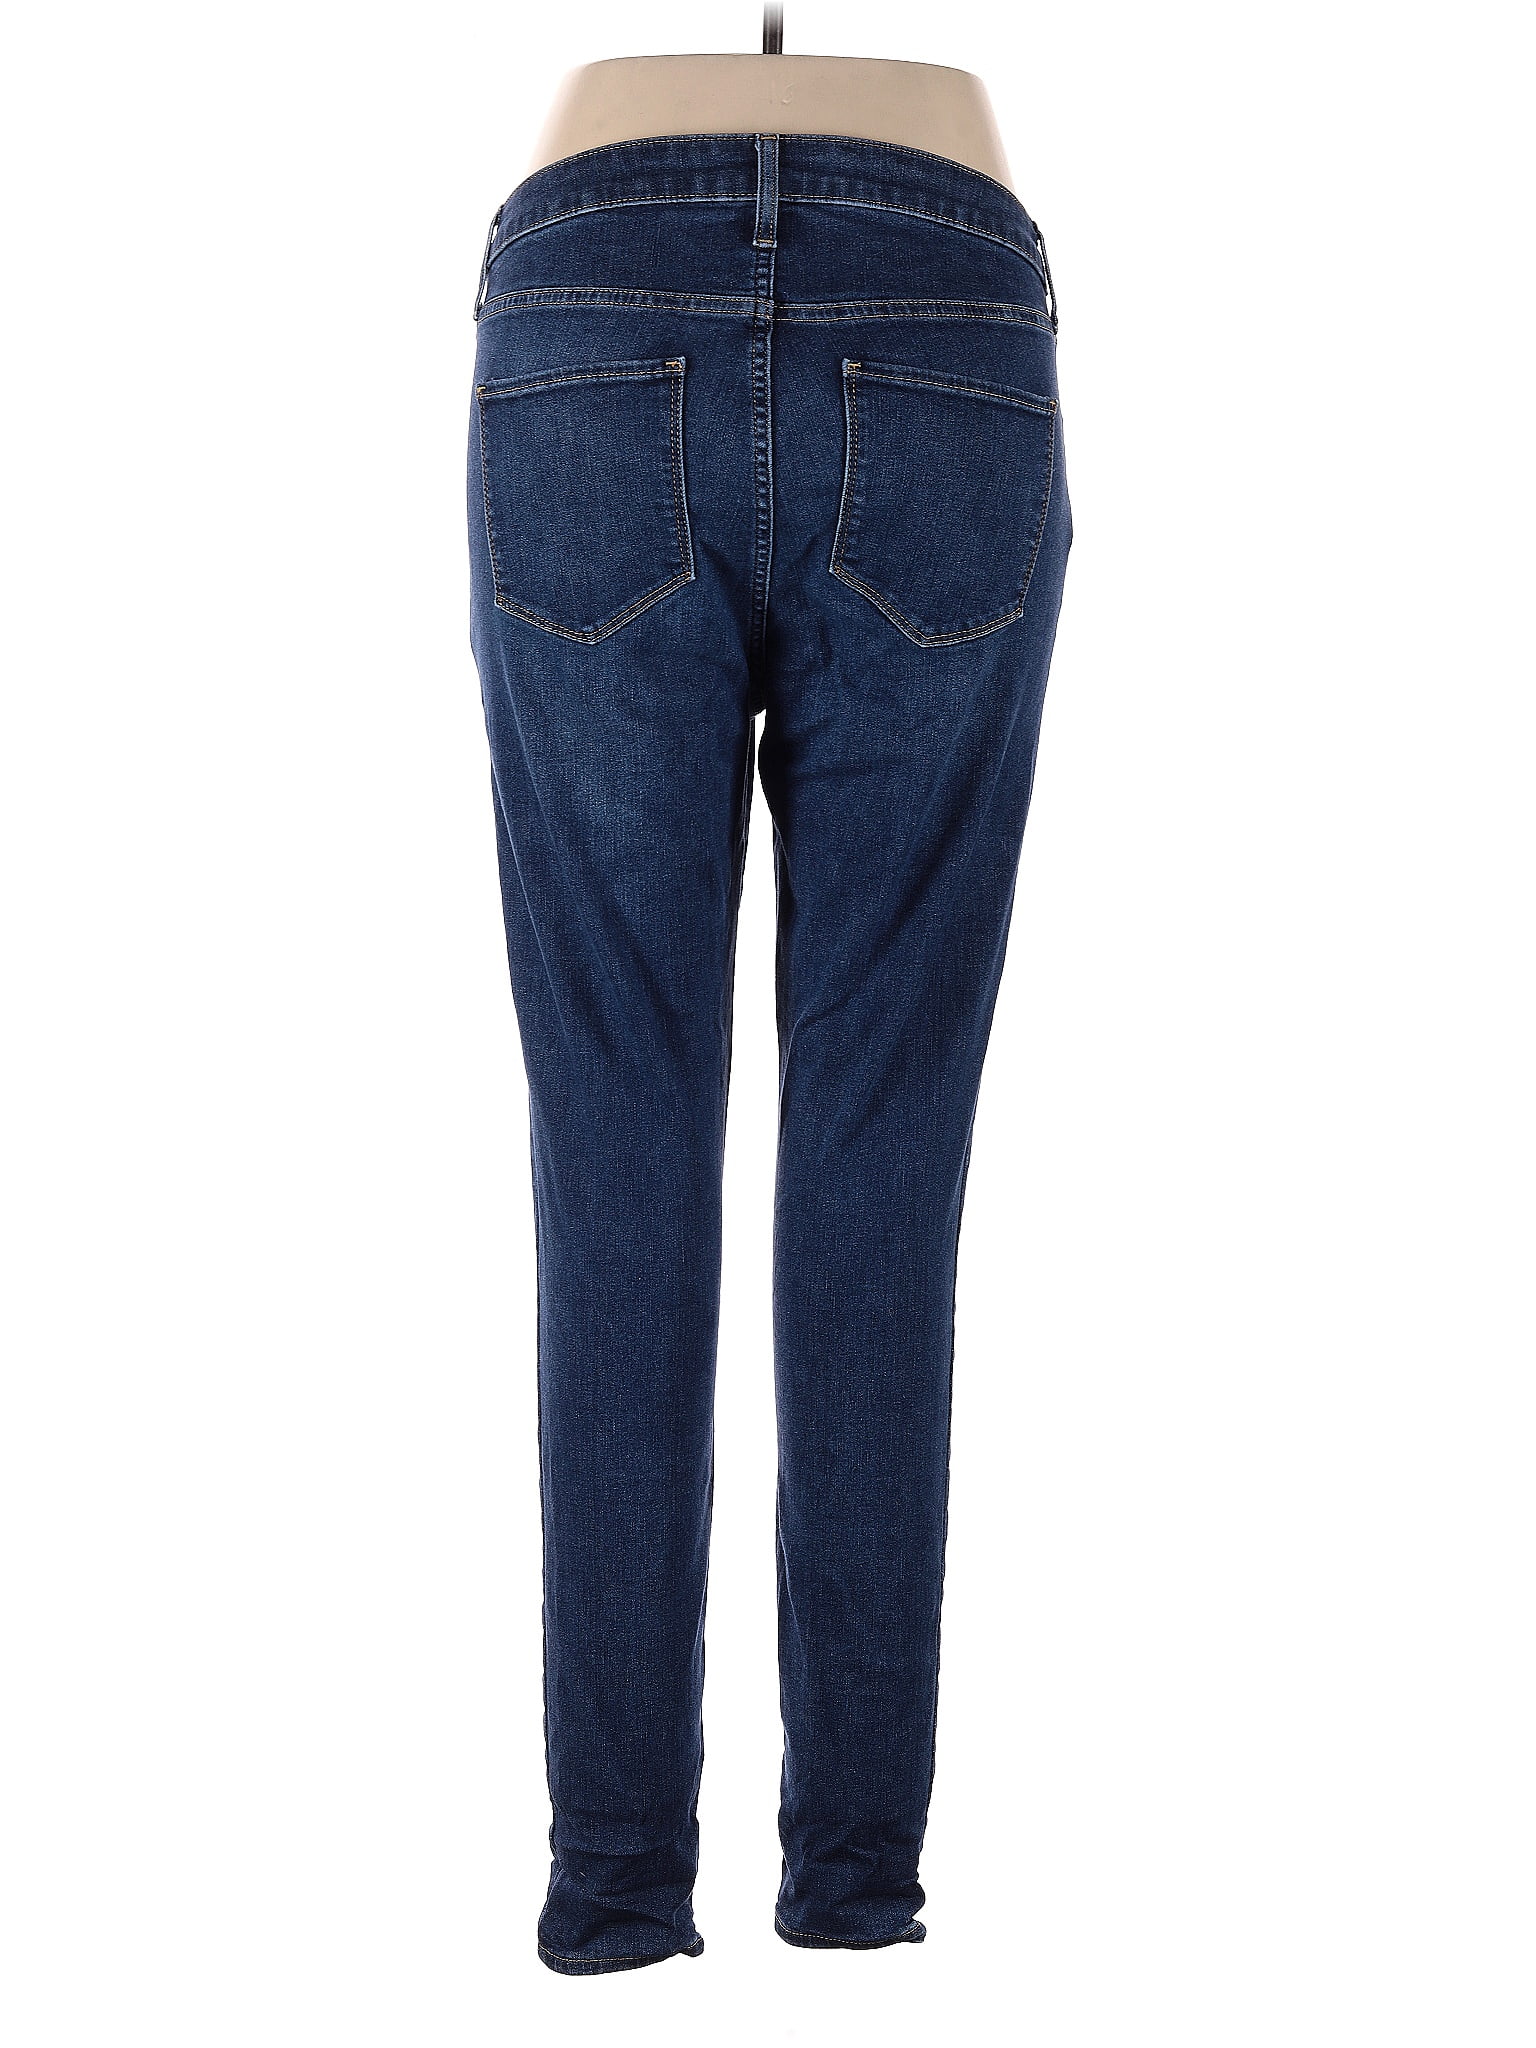 Gap Solid Blue Jeans Size 14 (Tall) - 68% off